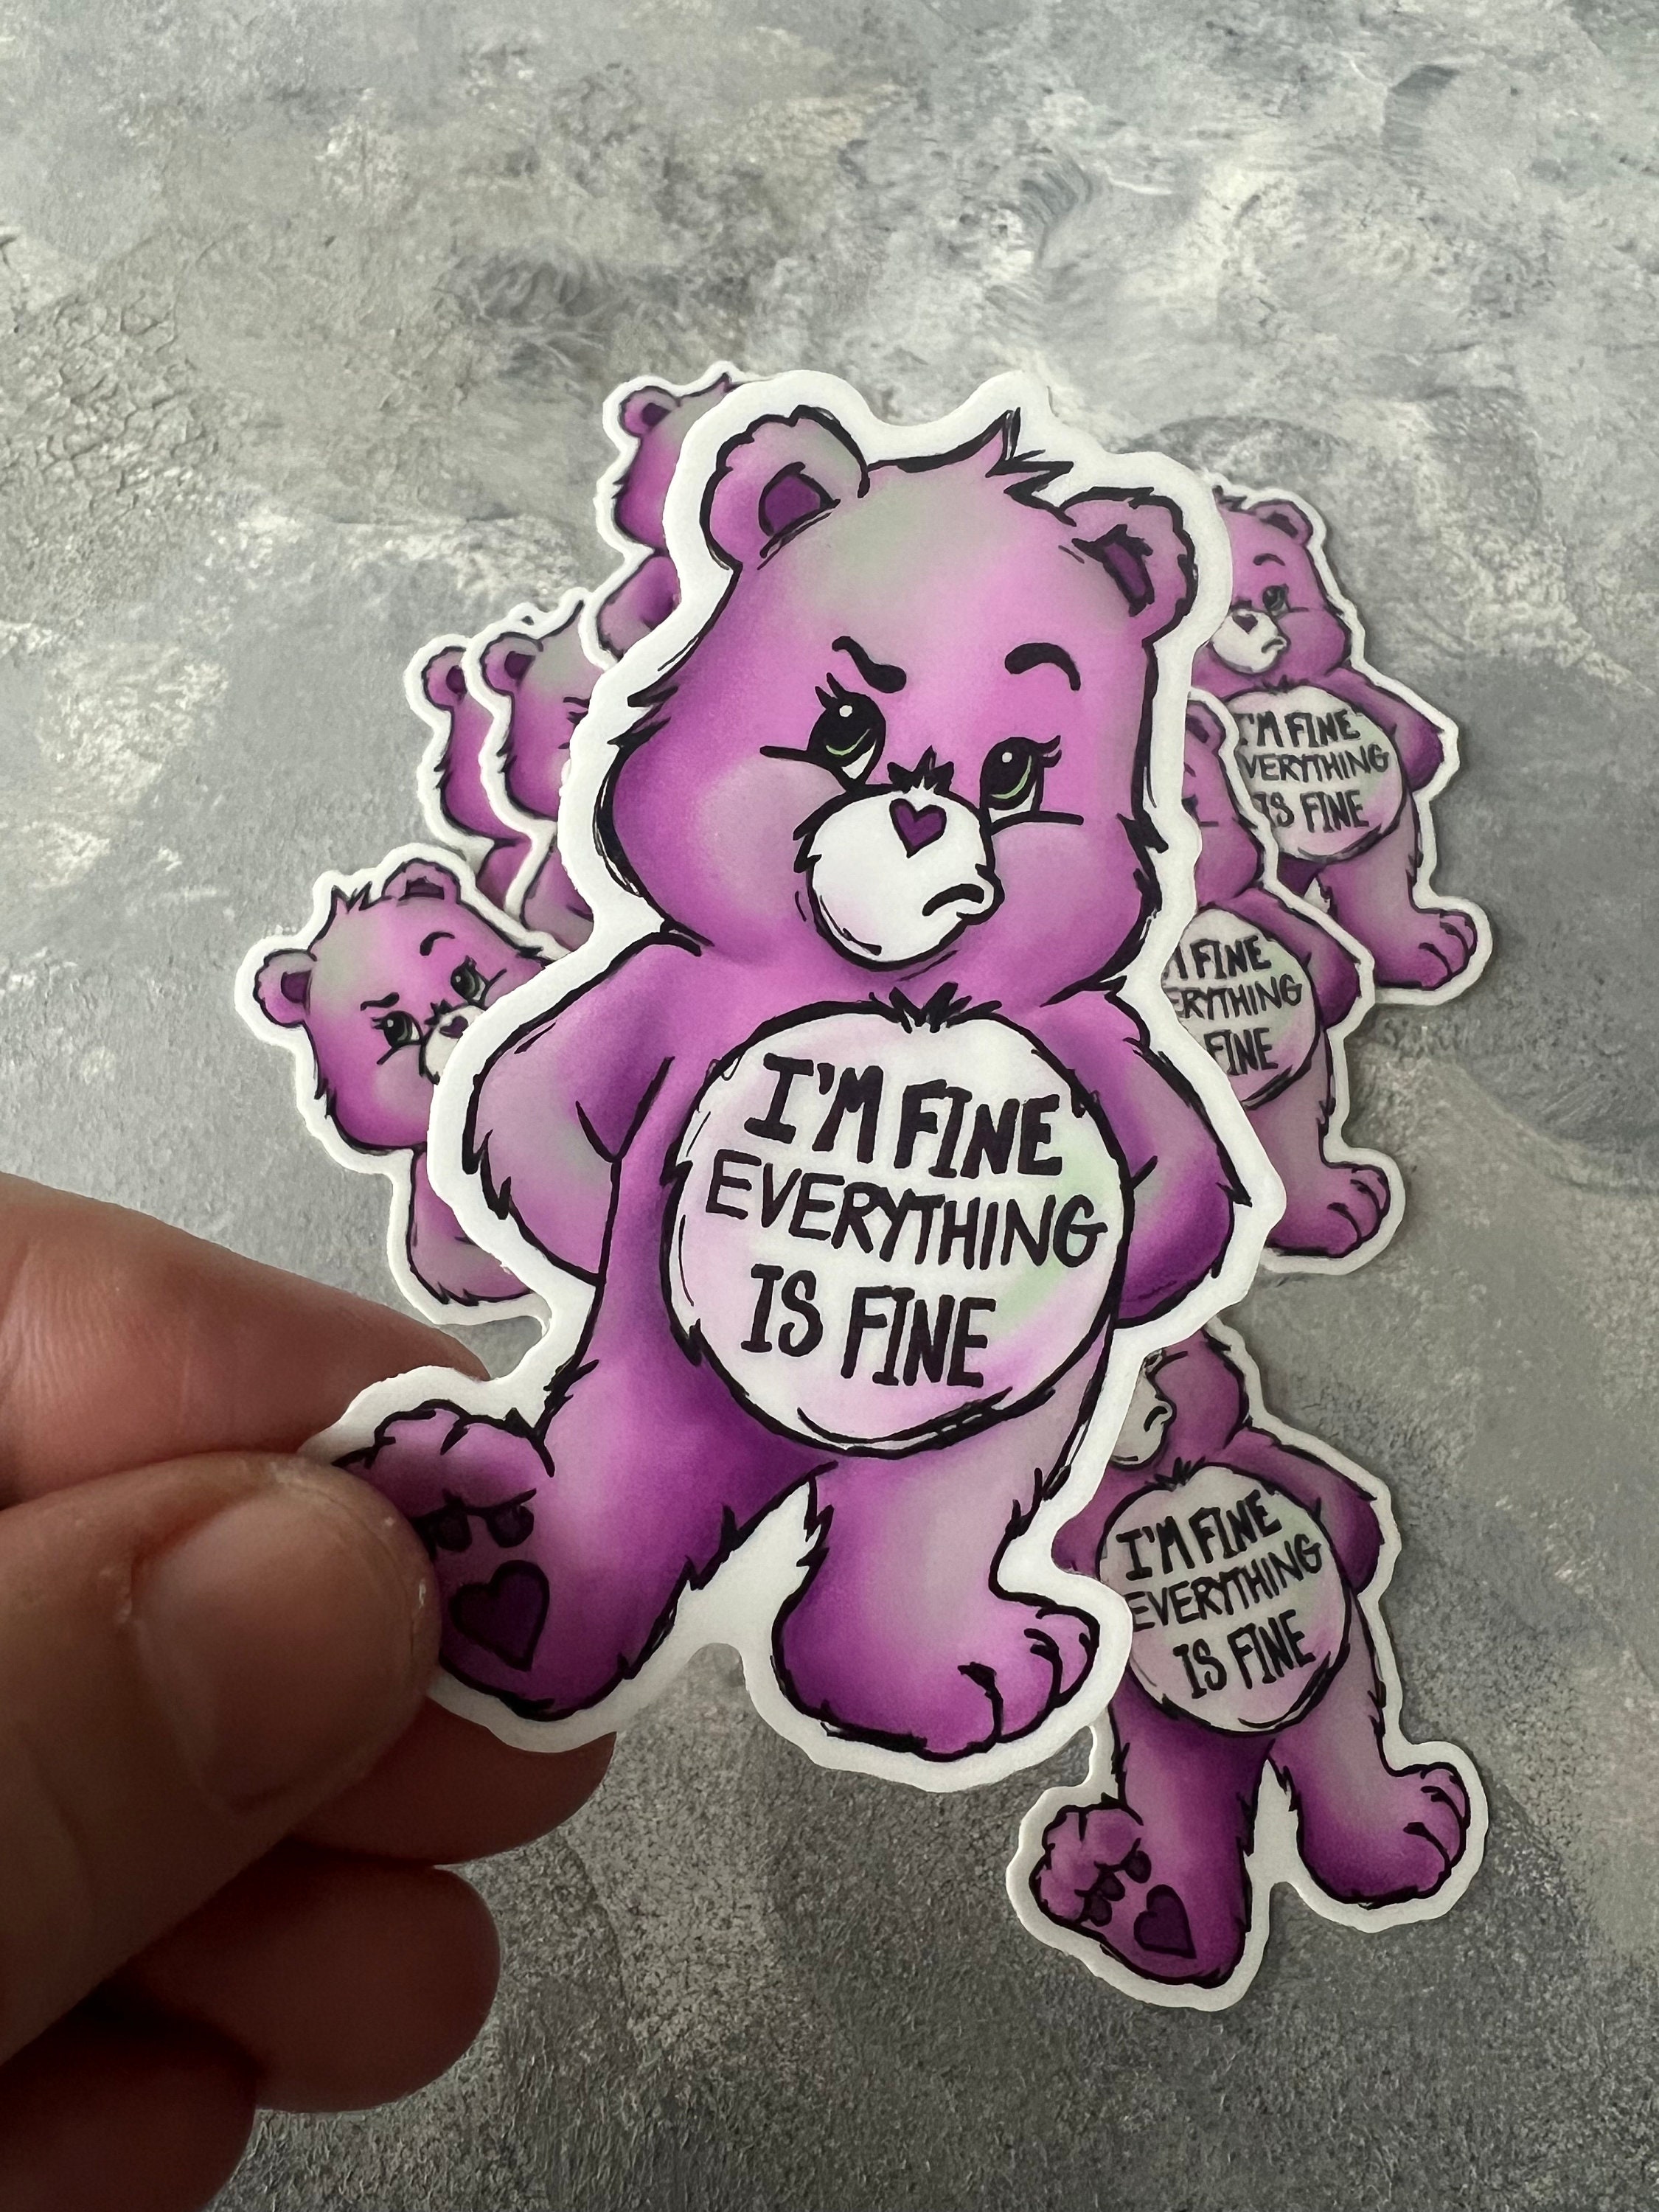 Care More Care Bear Sticker for Sale by screengirl